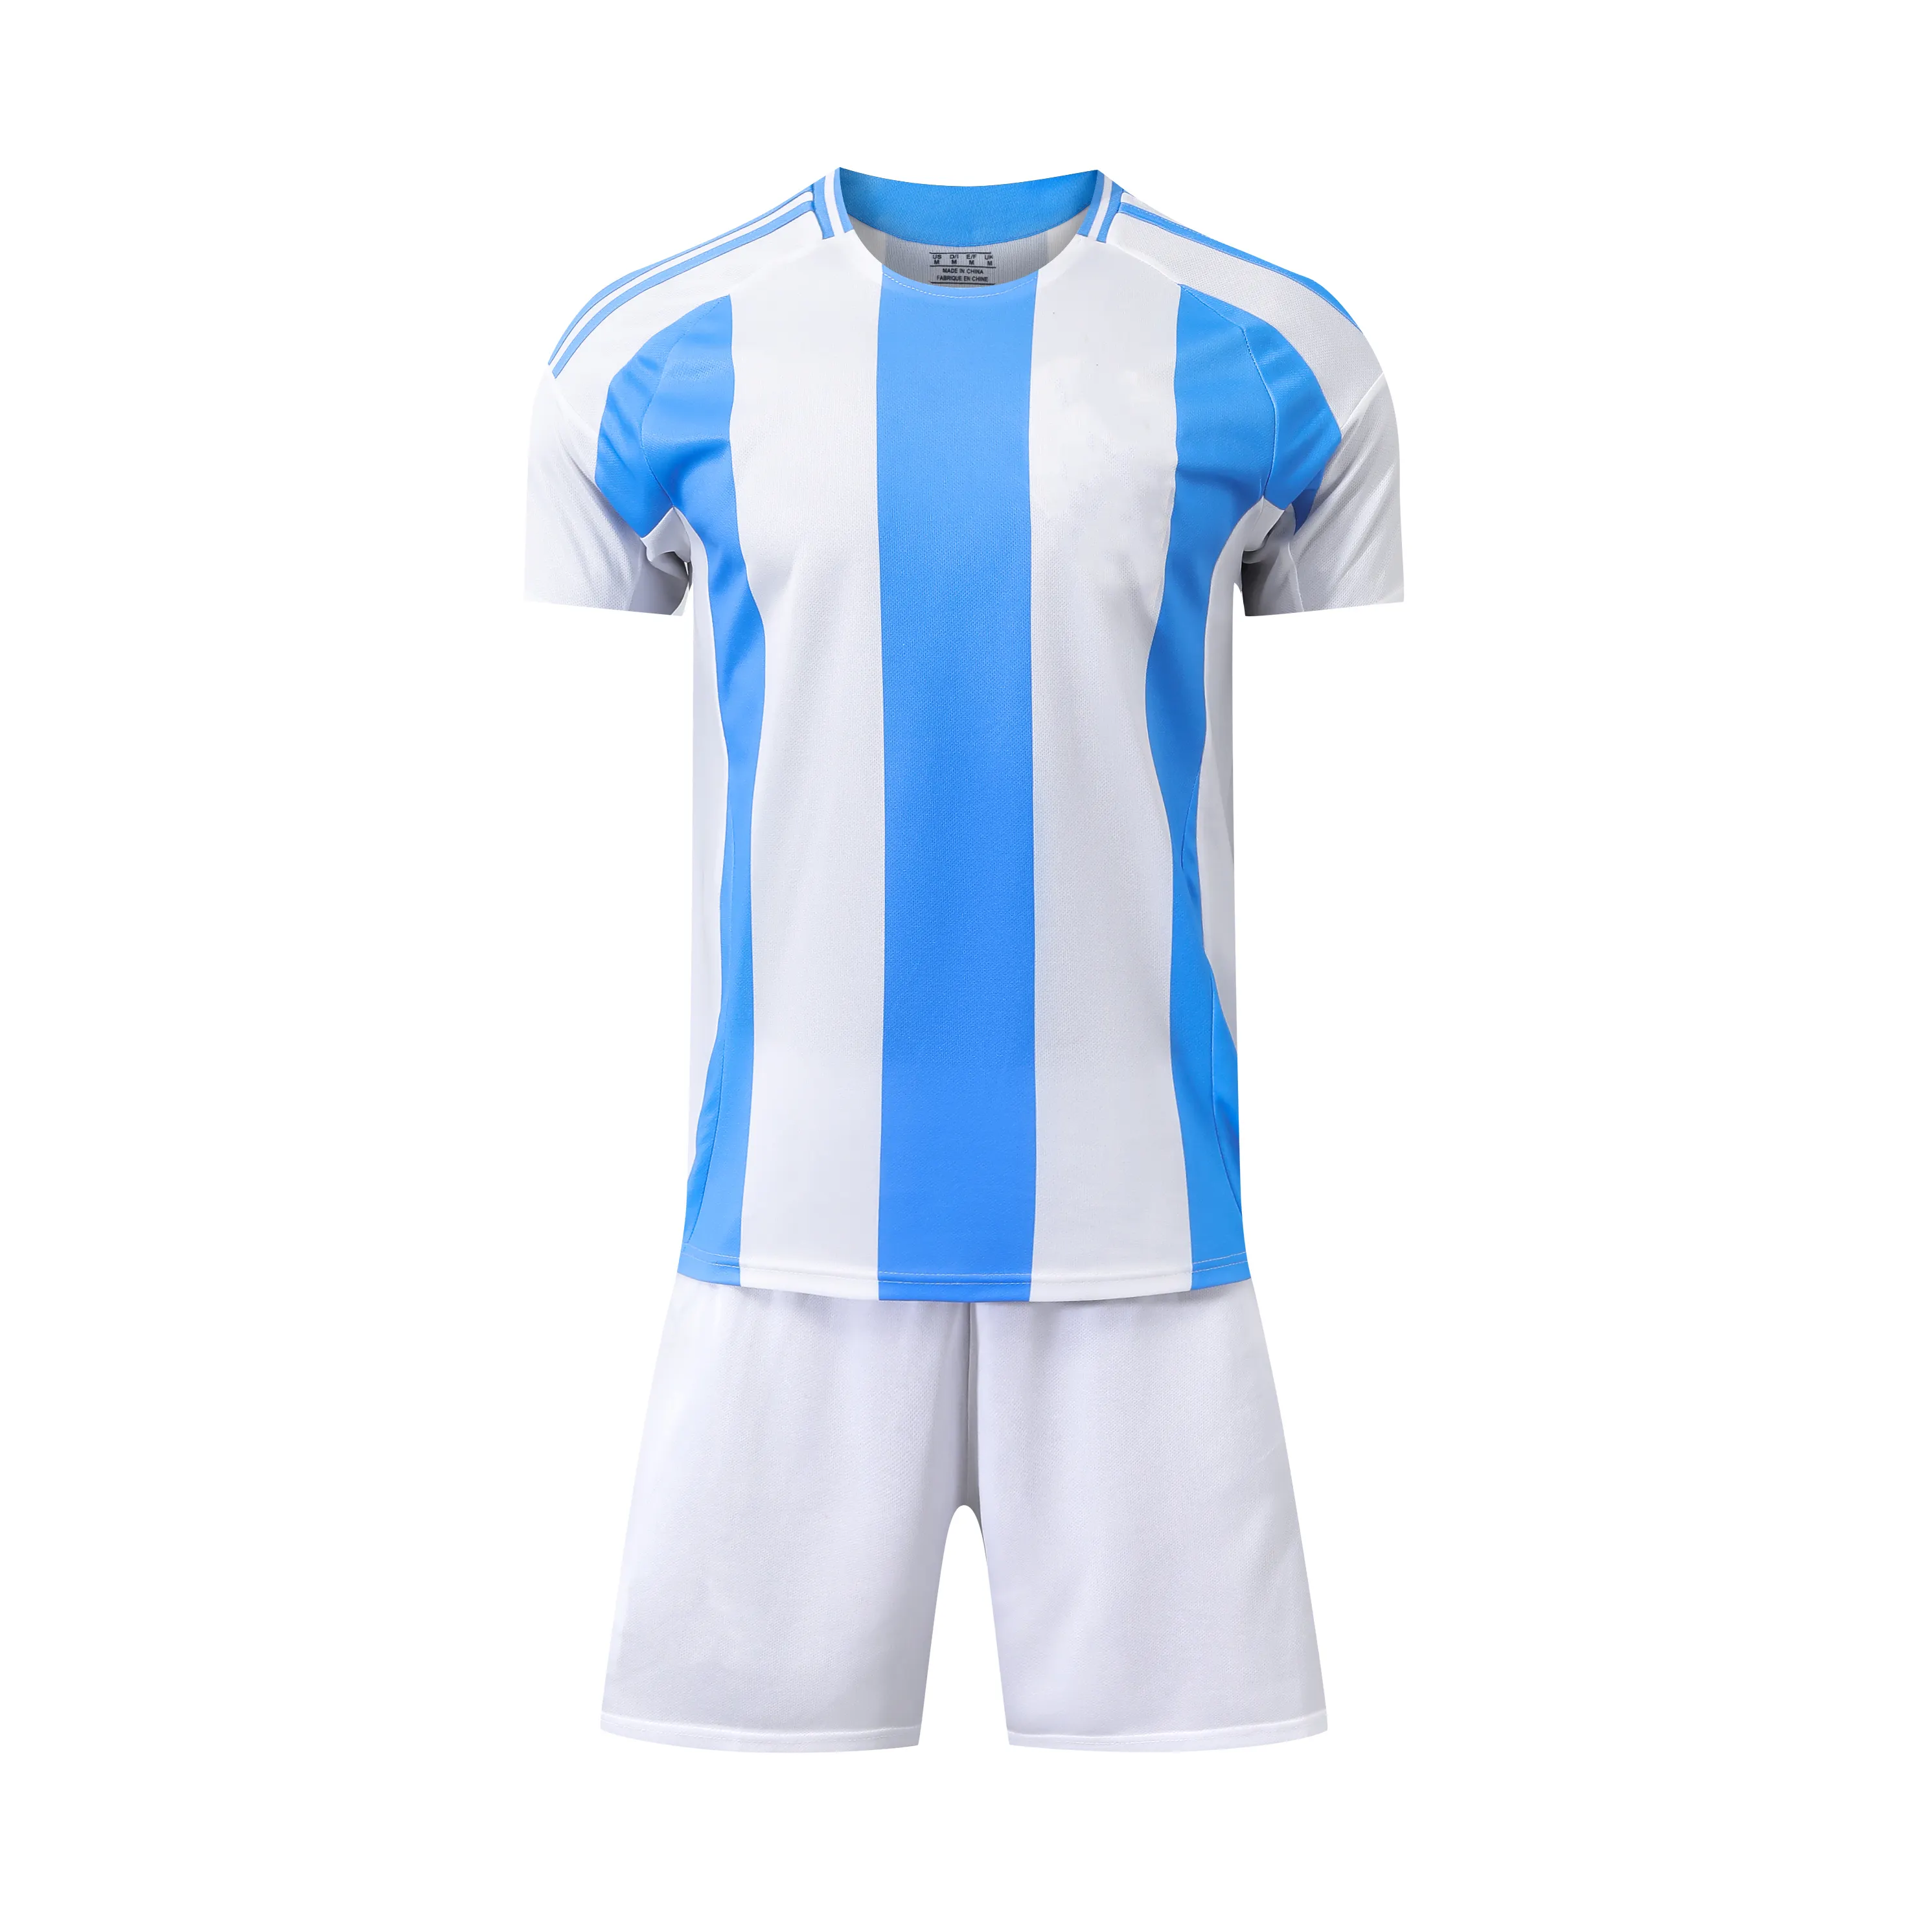 Euro Italy Germany France Portugal Brazil USA Argentina National Team Cup Football Shirt Soccer Jersey Sublimation Blank Uniform